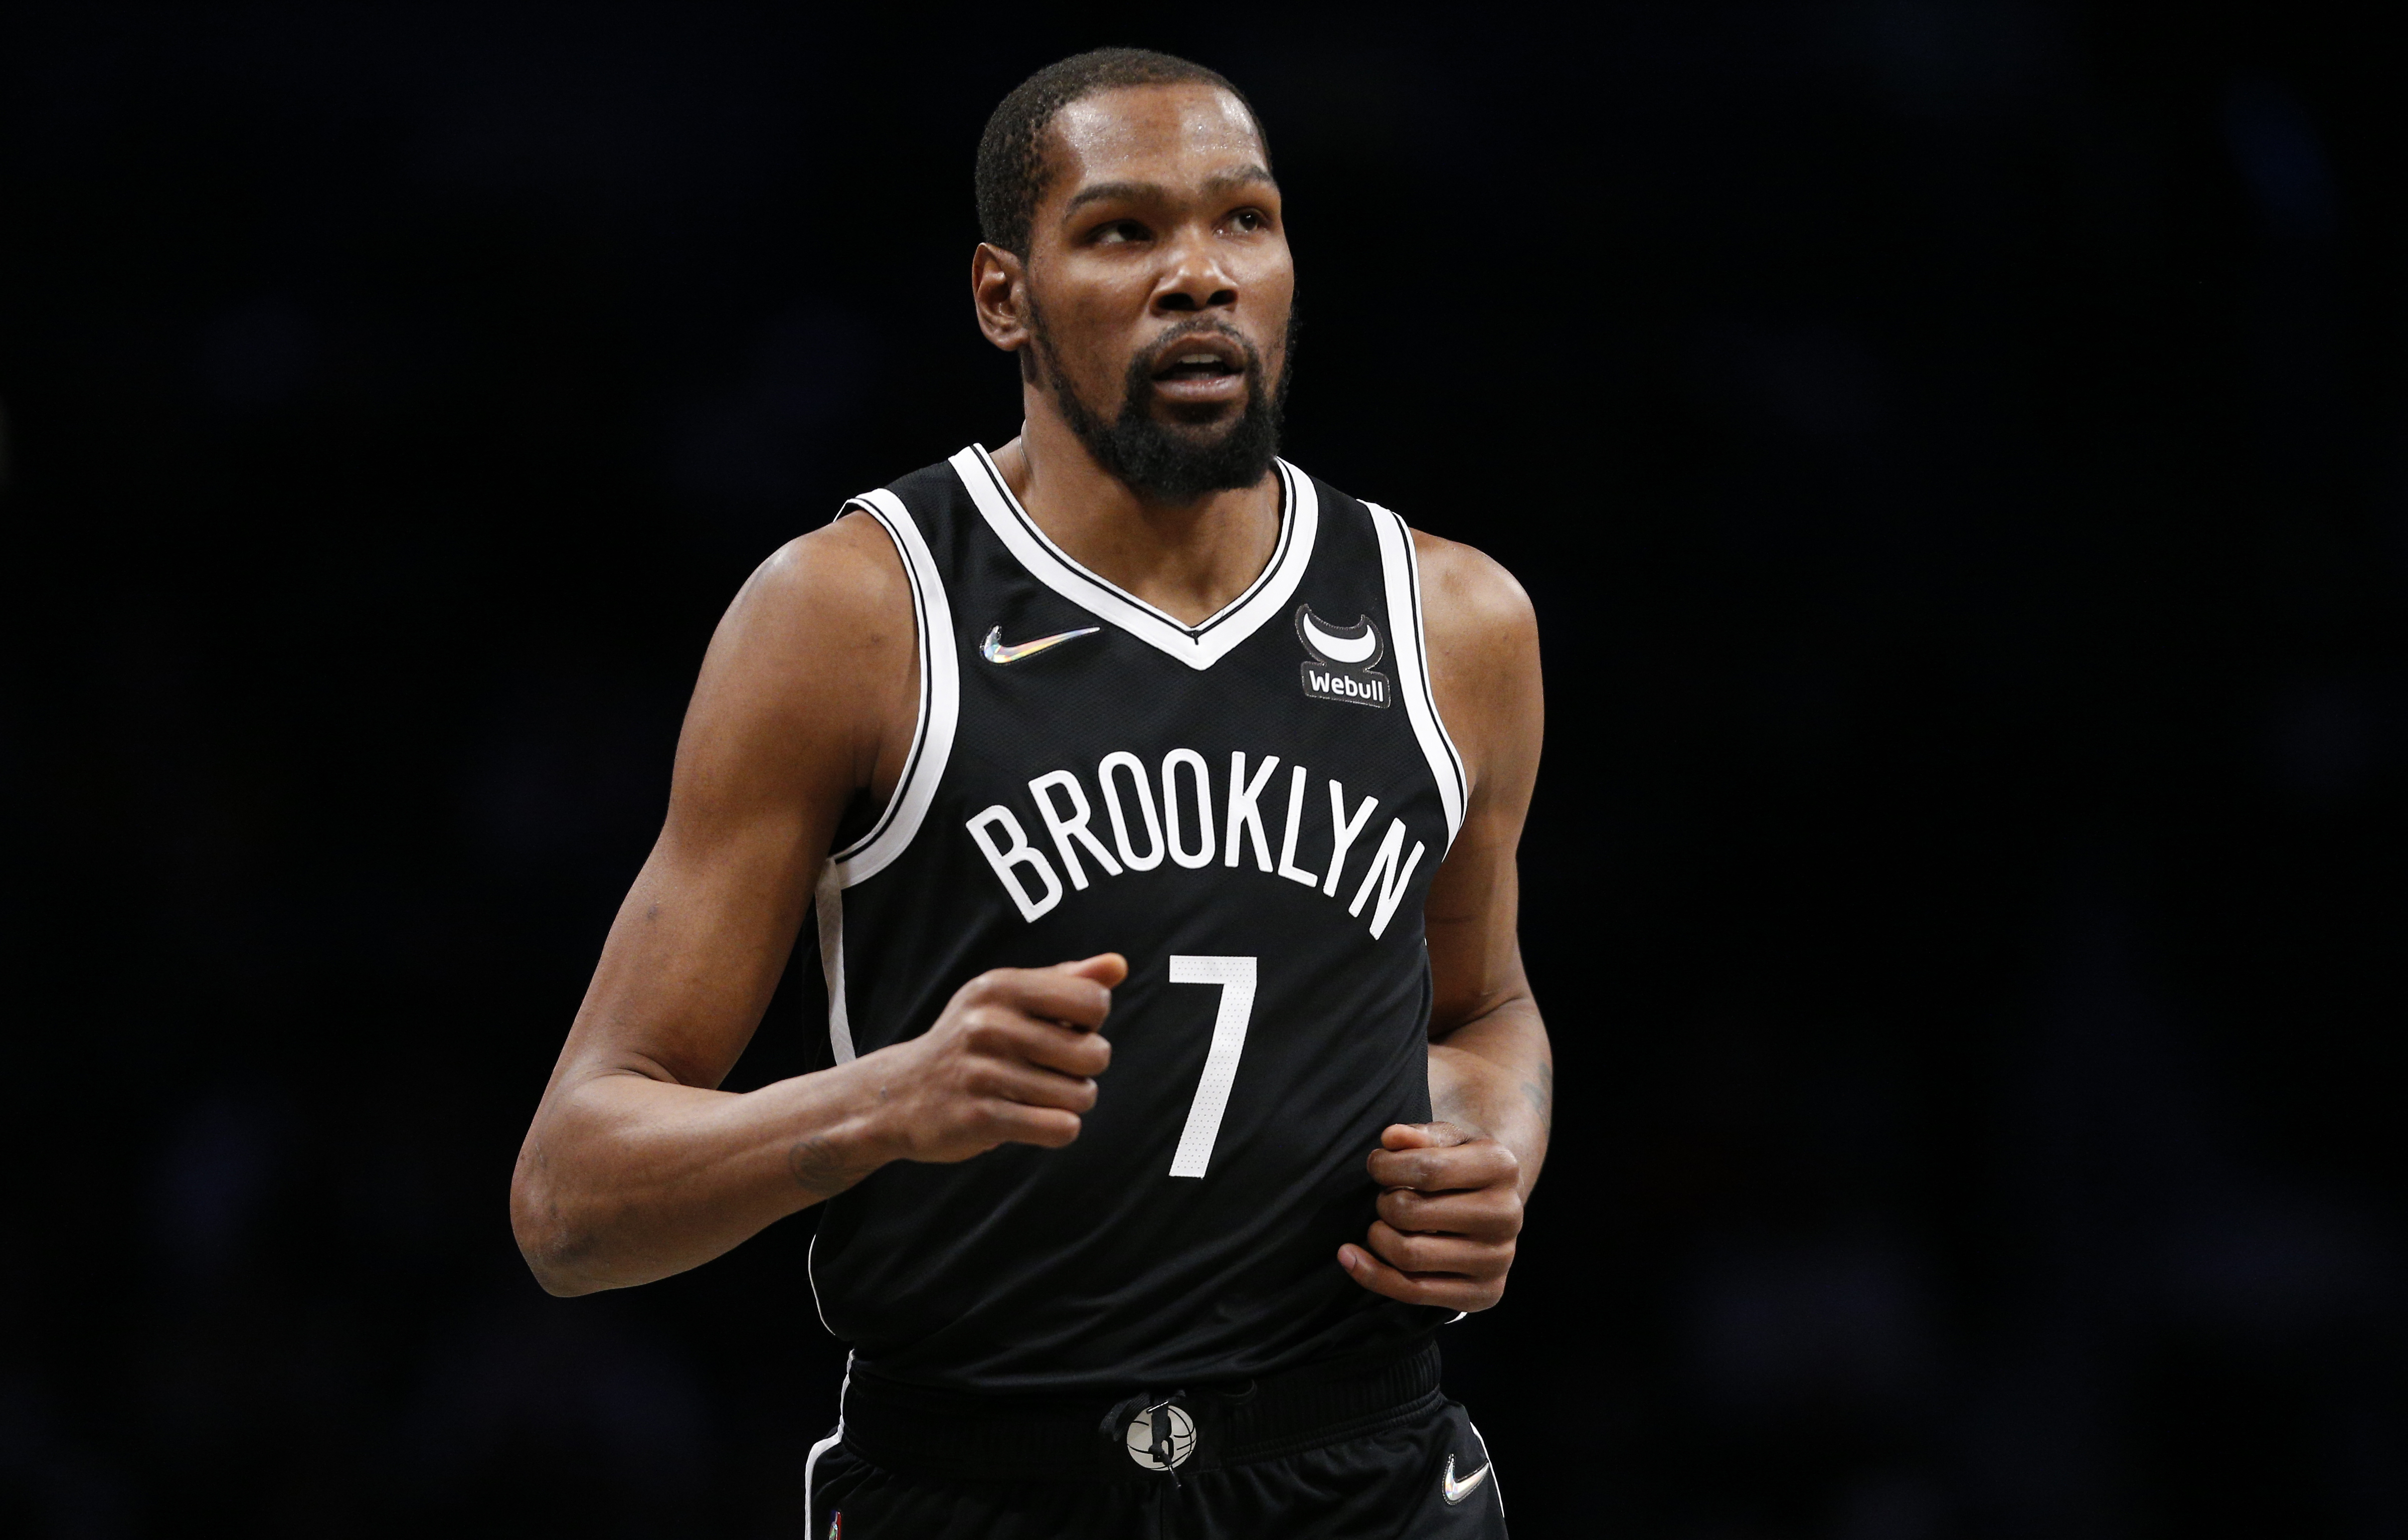 Nets' Kevin Durant on Return from Injury: I Don't Look at Myself as a Savior